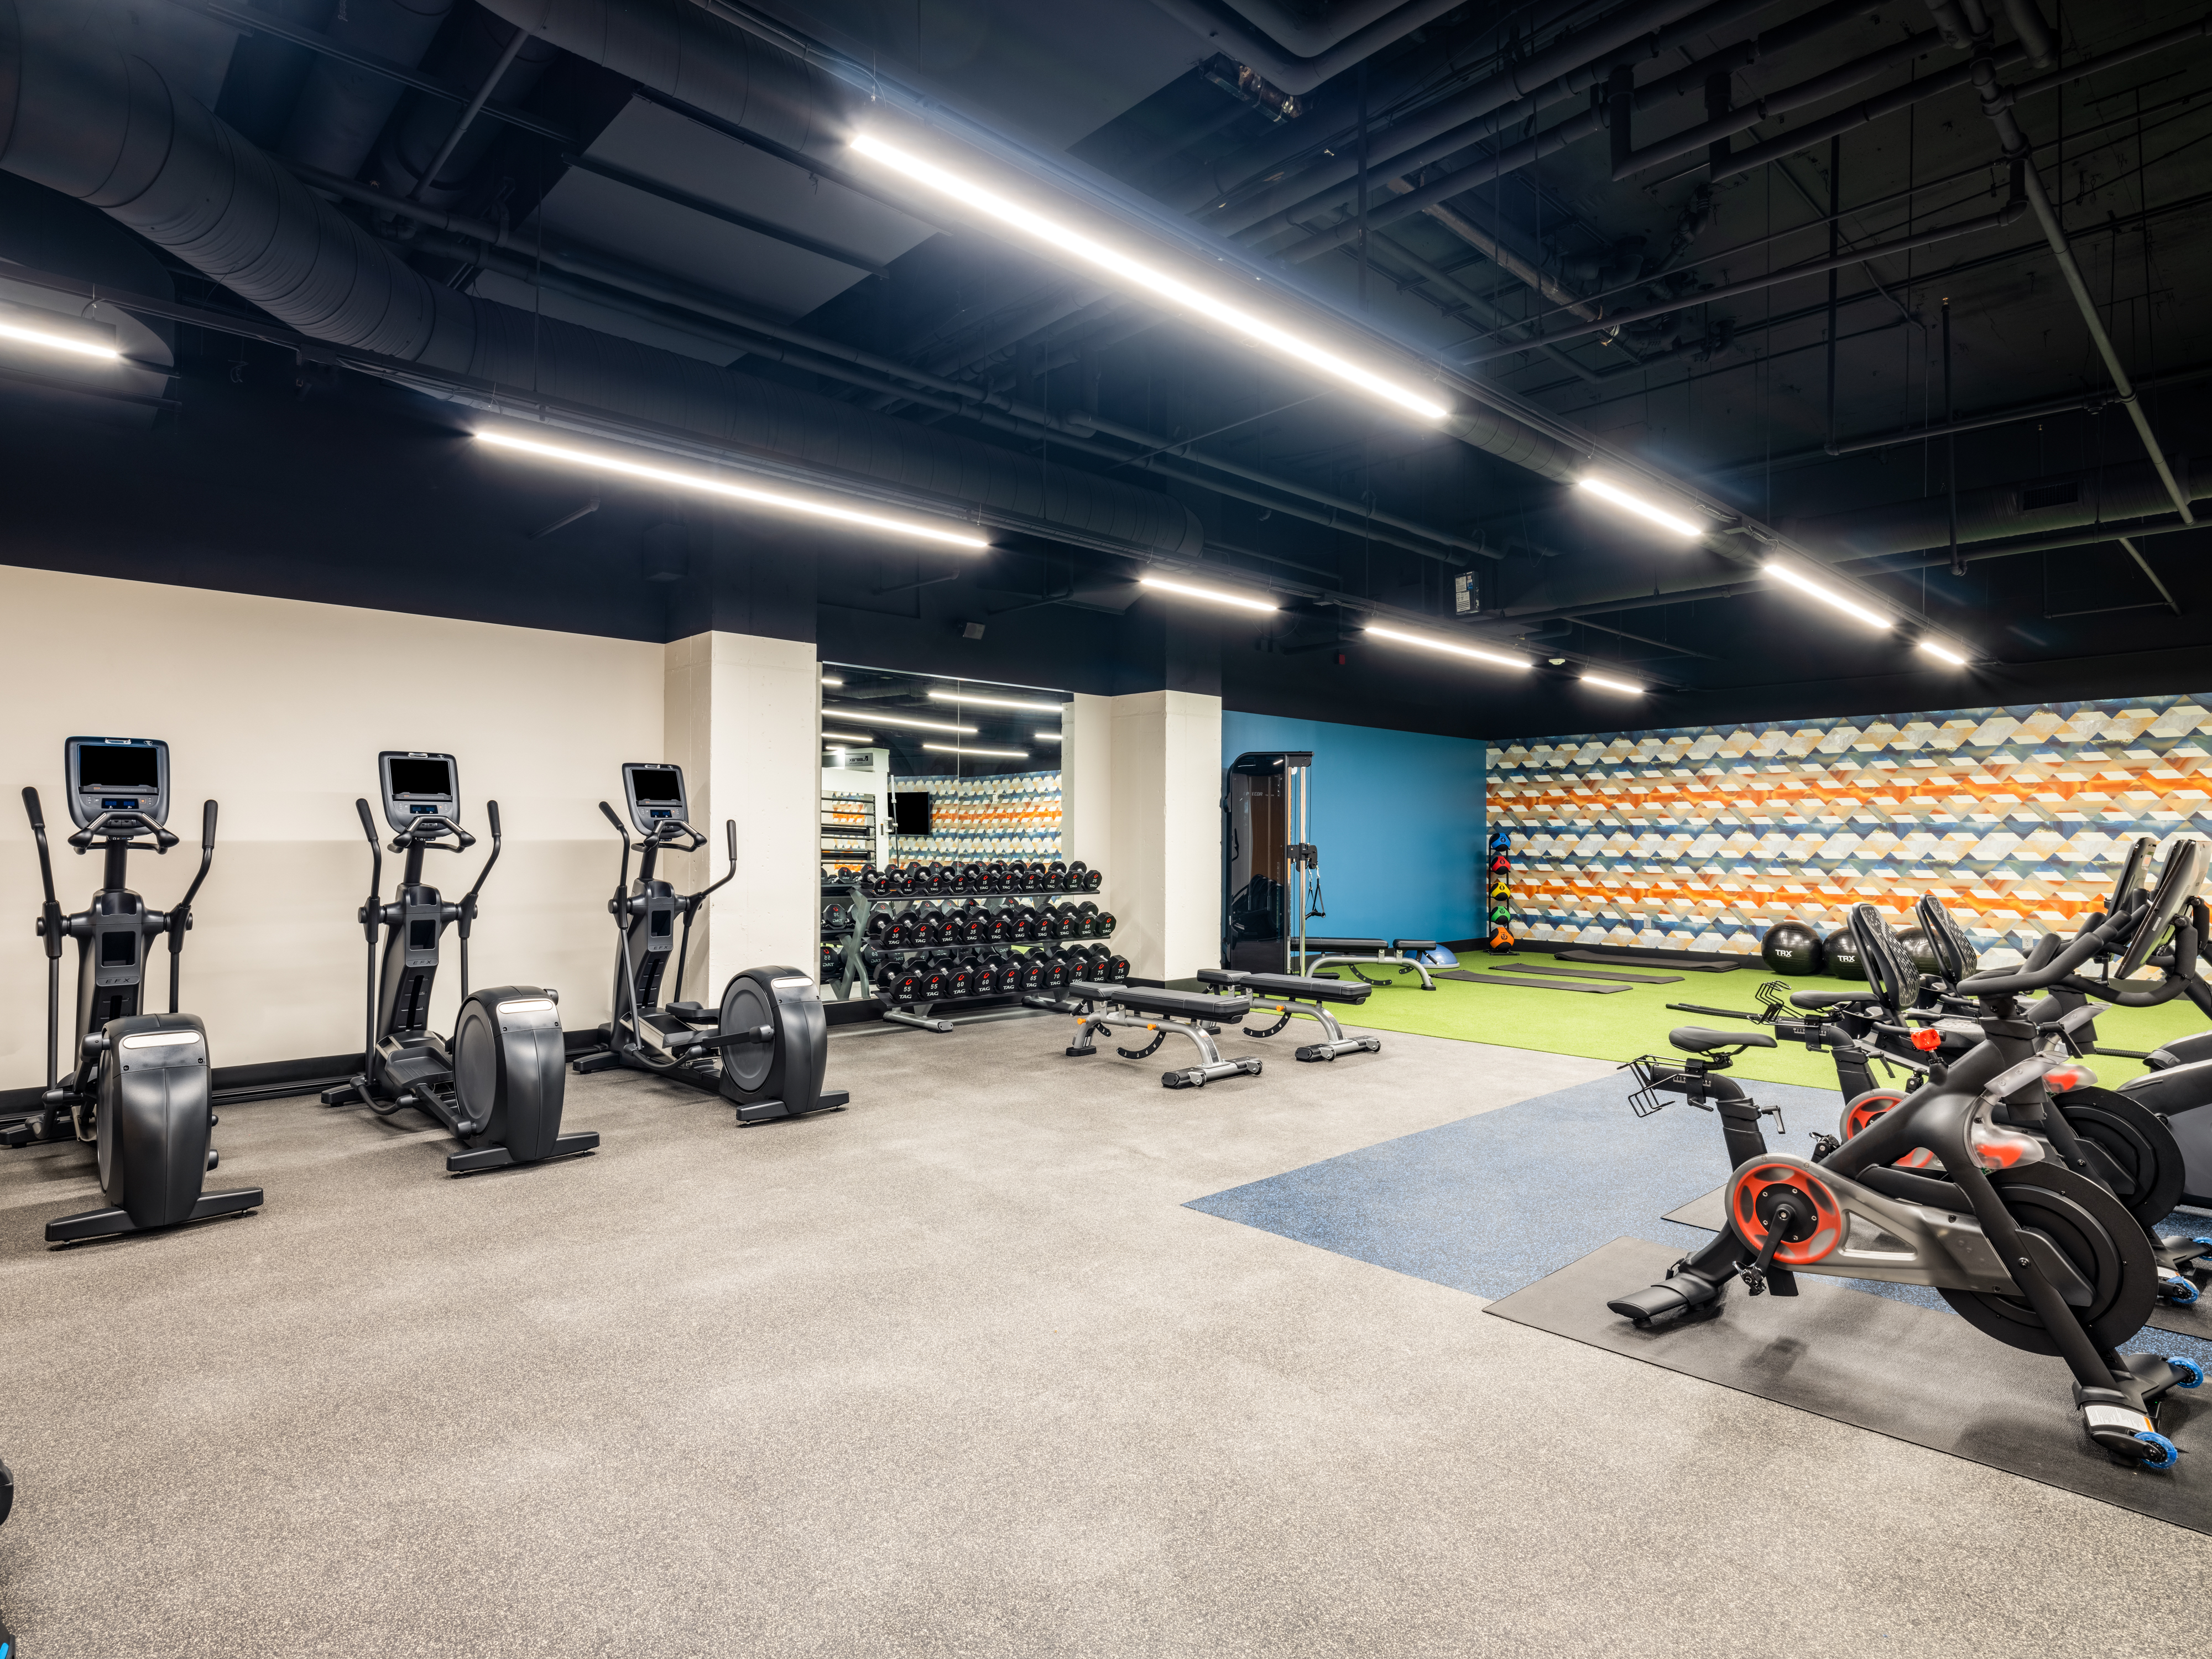 Cardio equipment and hand weights for your use